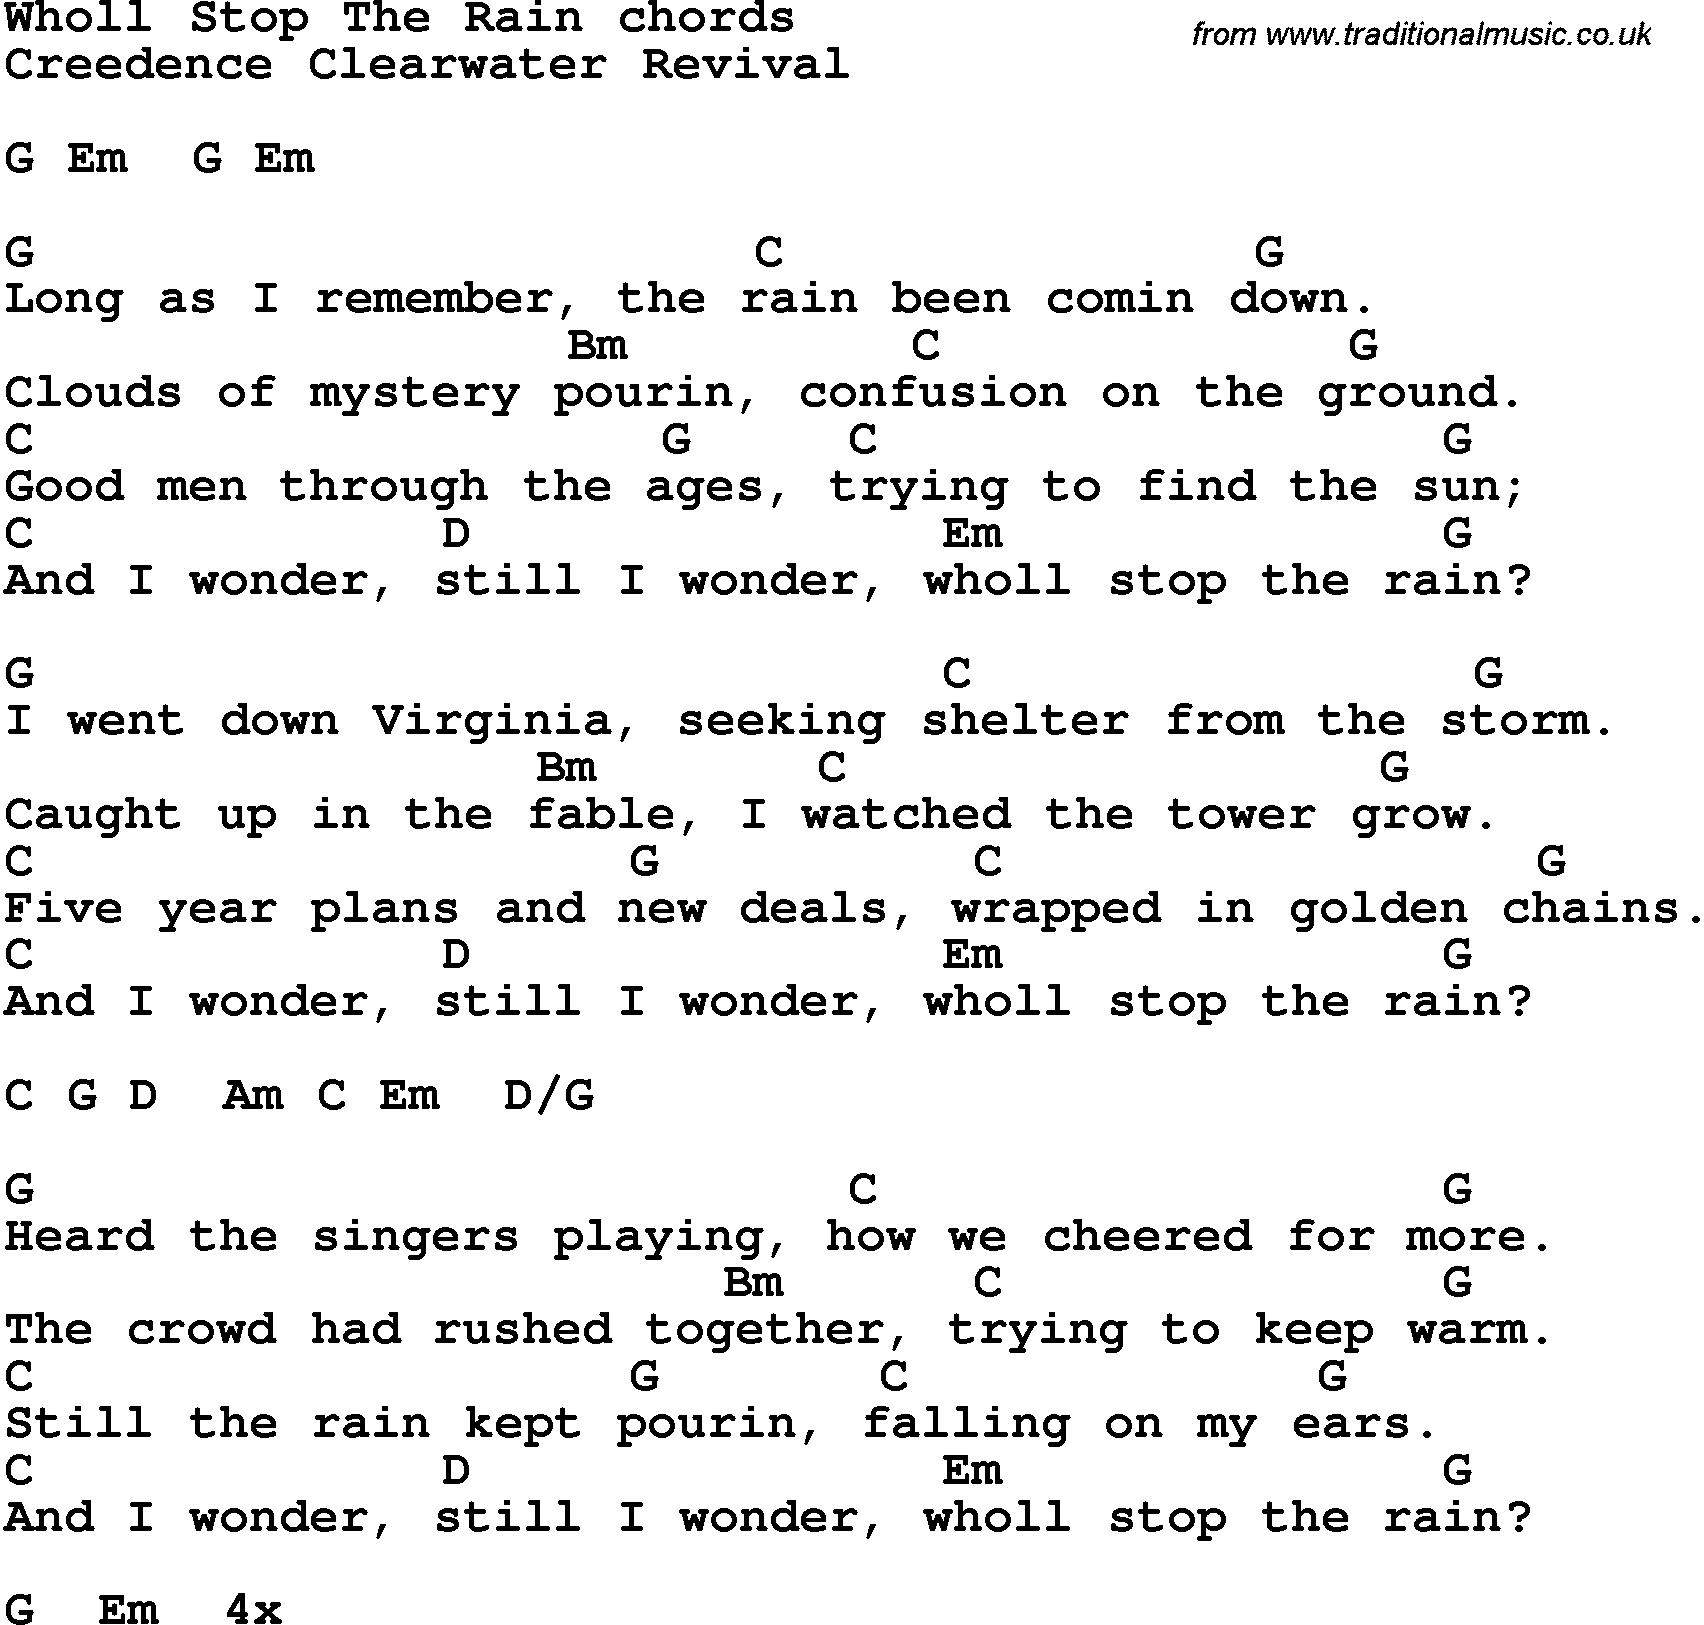 Song Lyrics with guitar chords for Who'll Stop The Rain